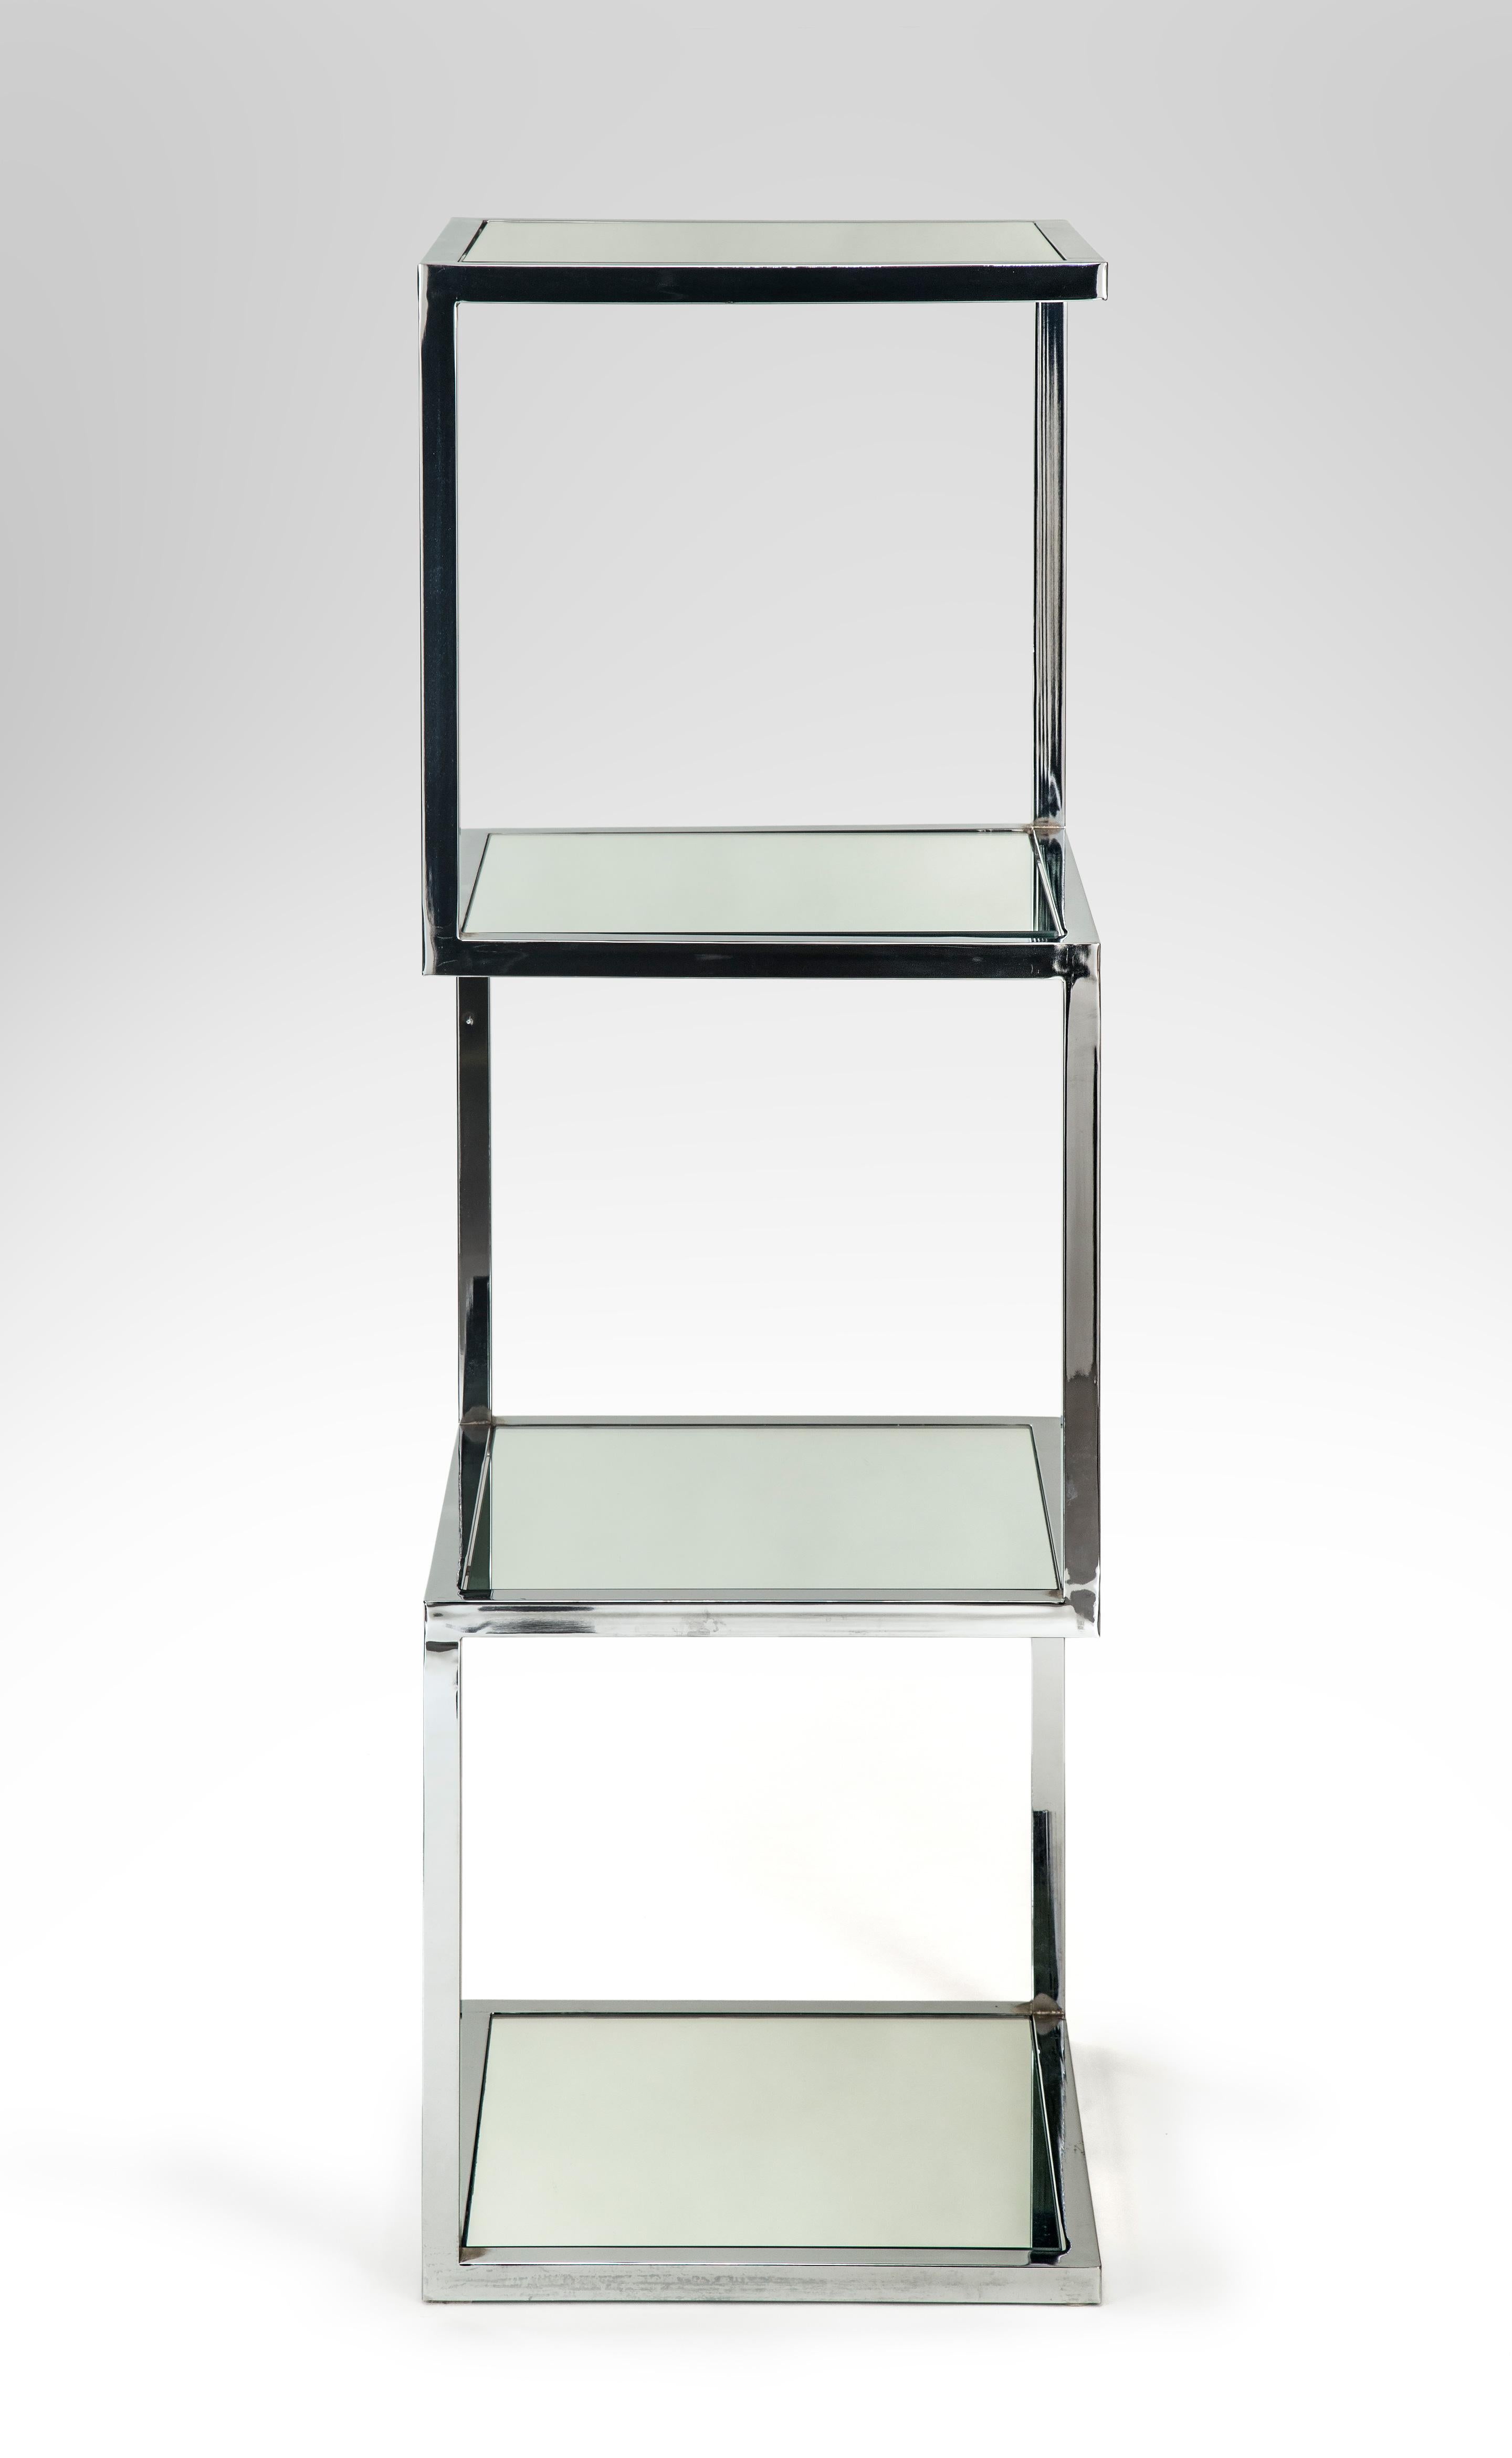 Mid-Century Modern chrome and mirror glass 4 Shelf Etagere
Mid-20th century
In the manner of Milo Baughman. Stylish and ever so useful, this midcentury four shelf étagère will make any collection displayed on it look fabulous. The vertical